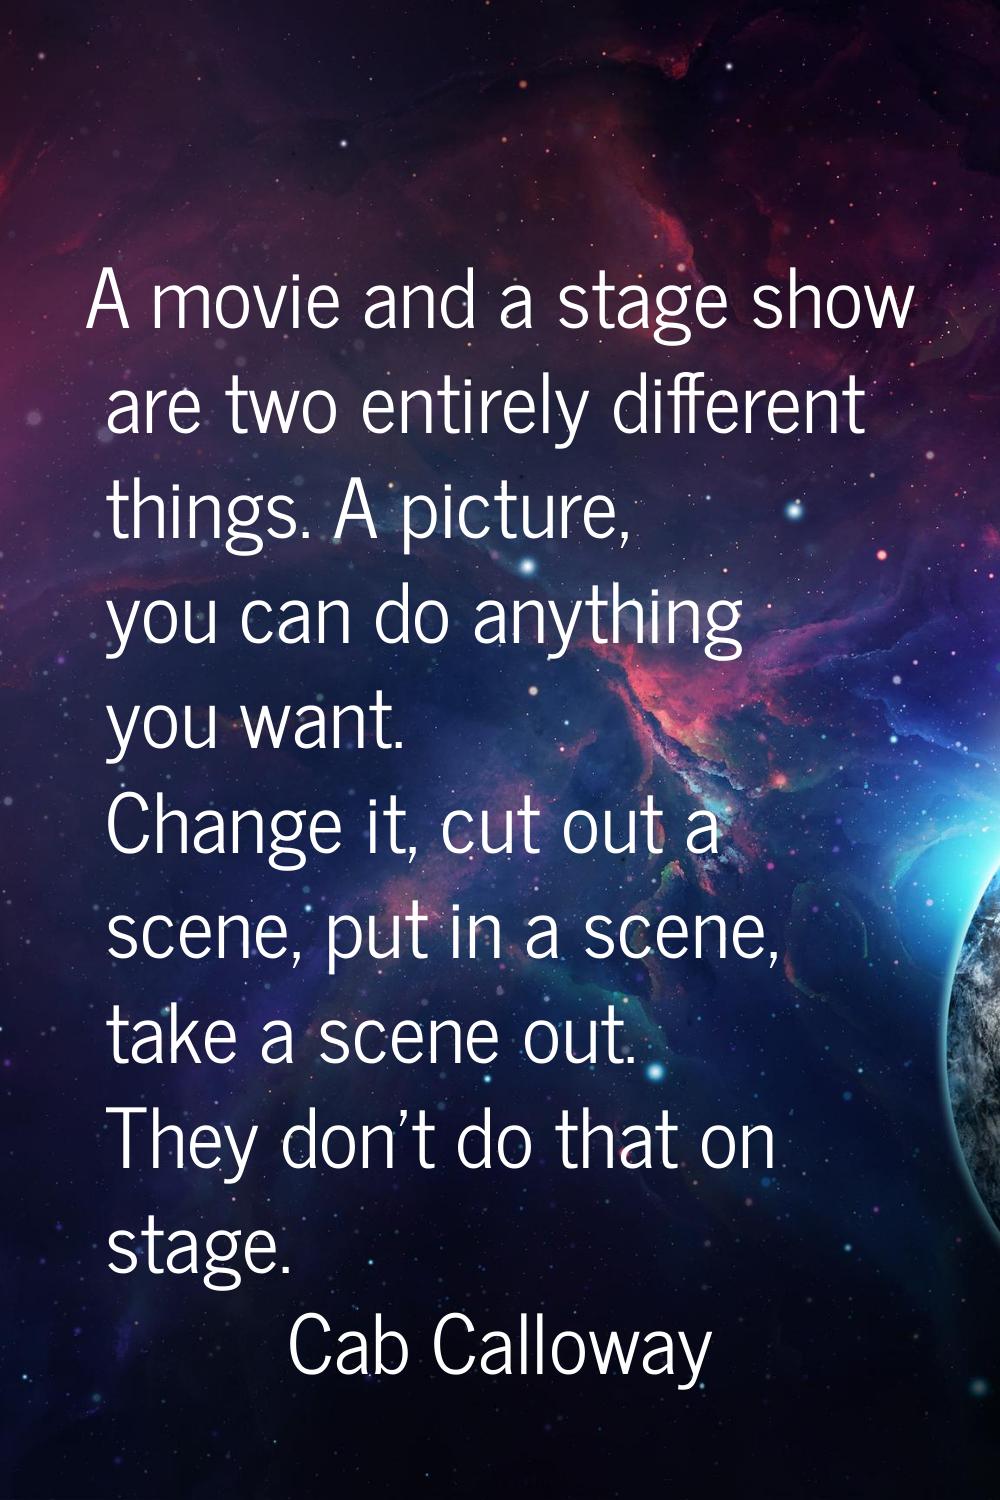 A movie and a stage show are two entirely different things. A picture, you can do anything you want